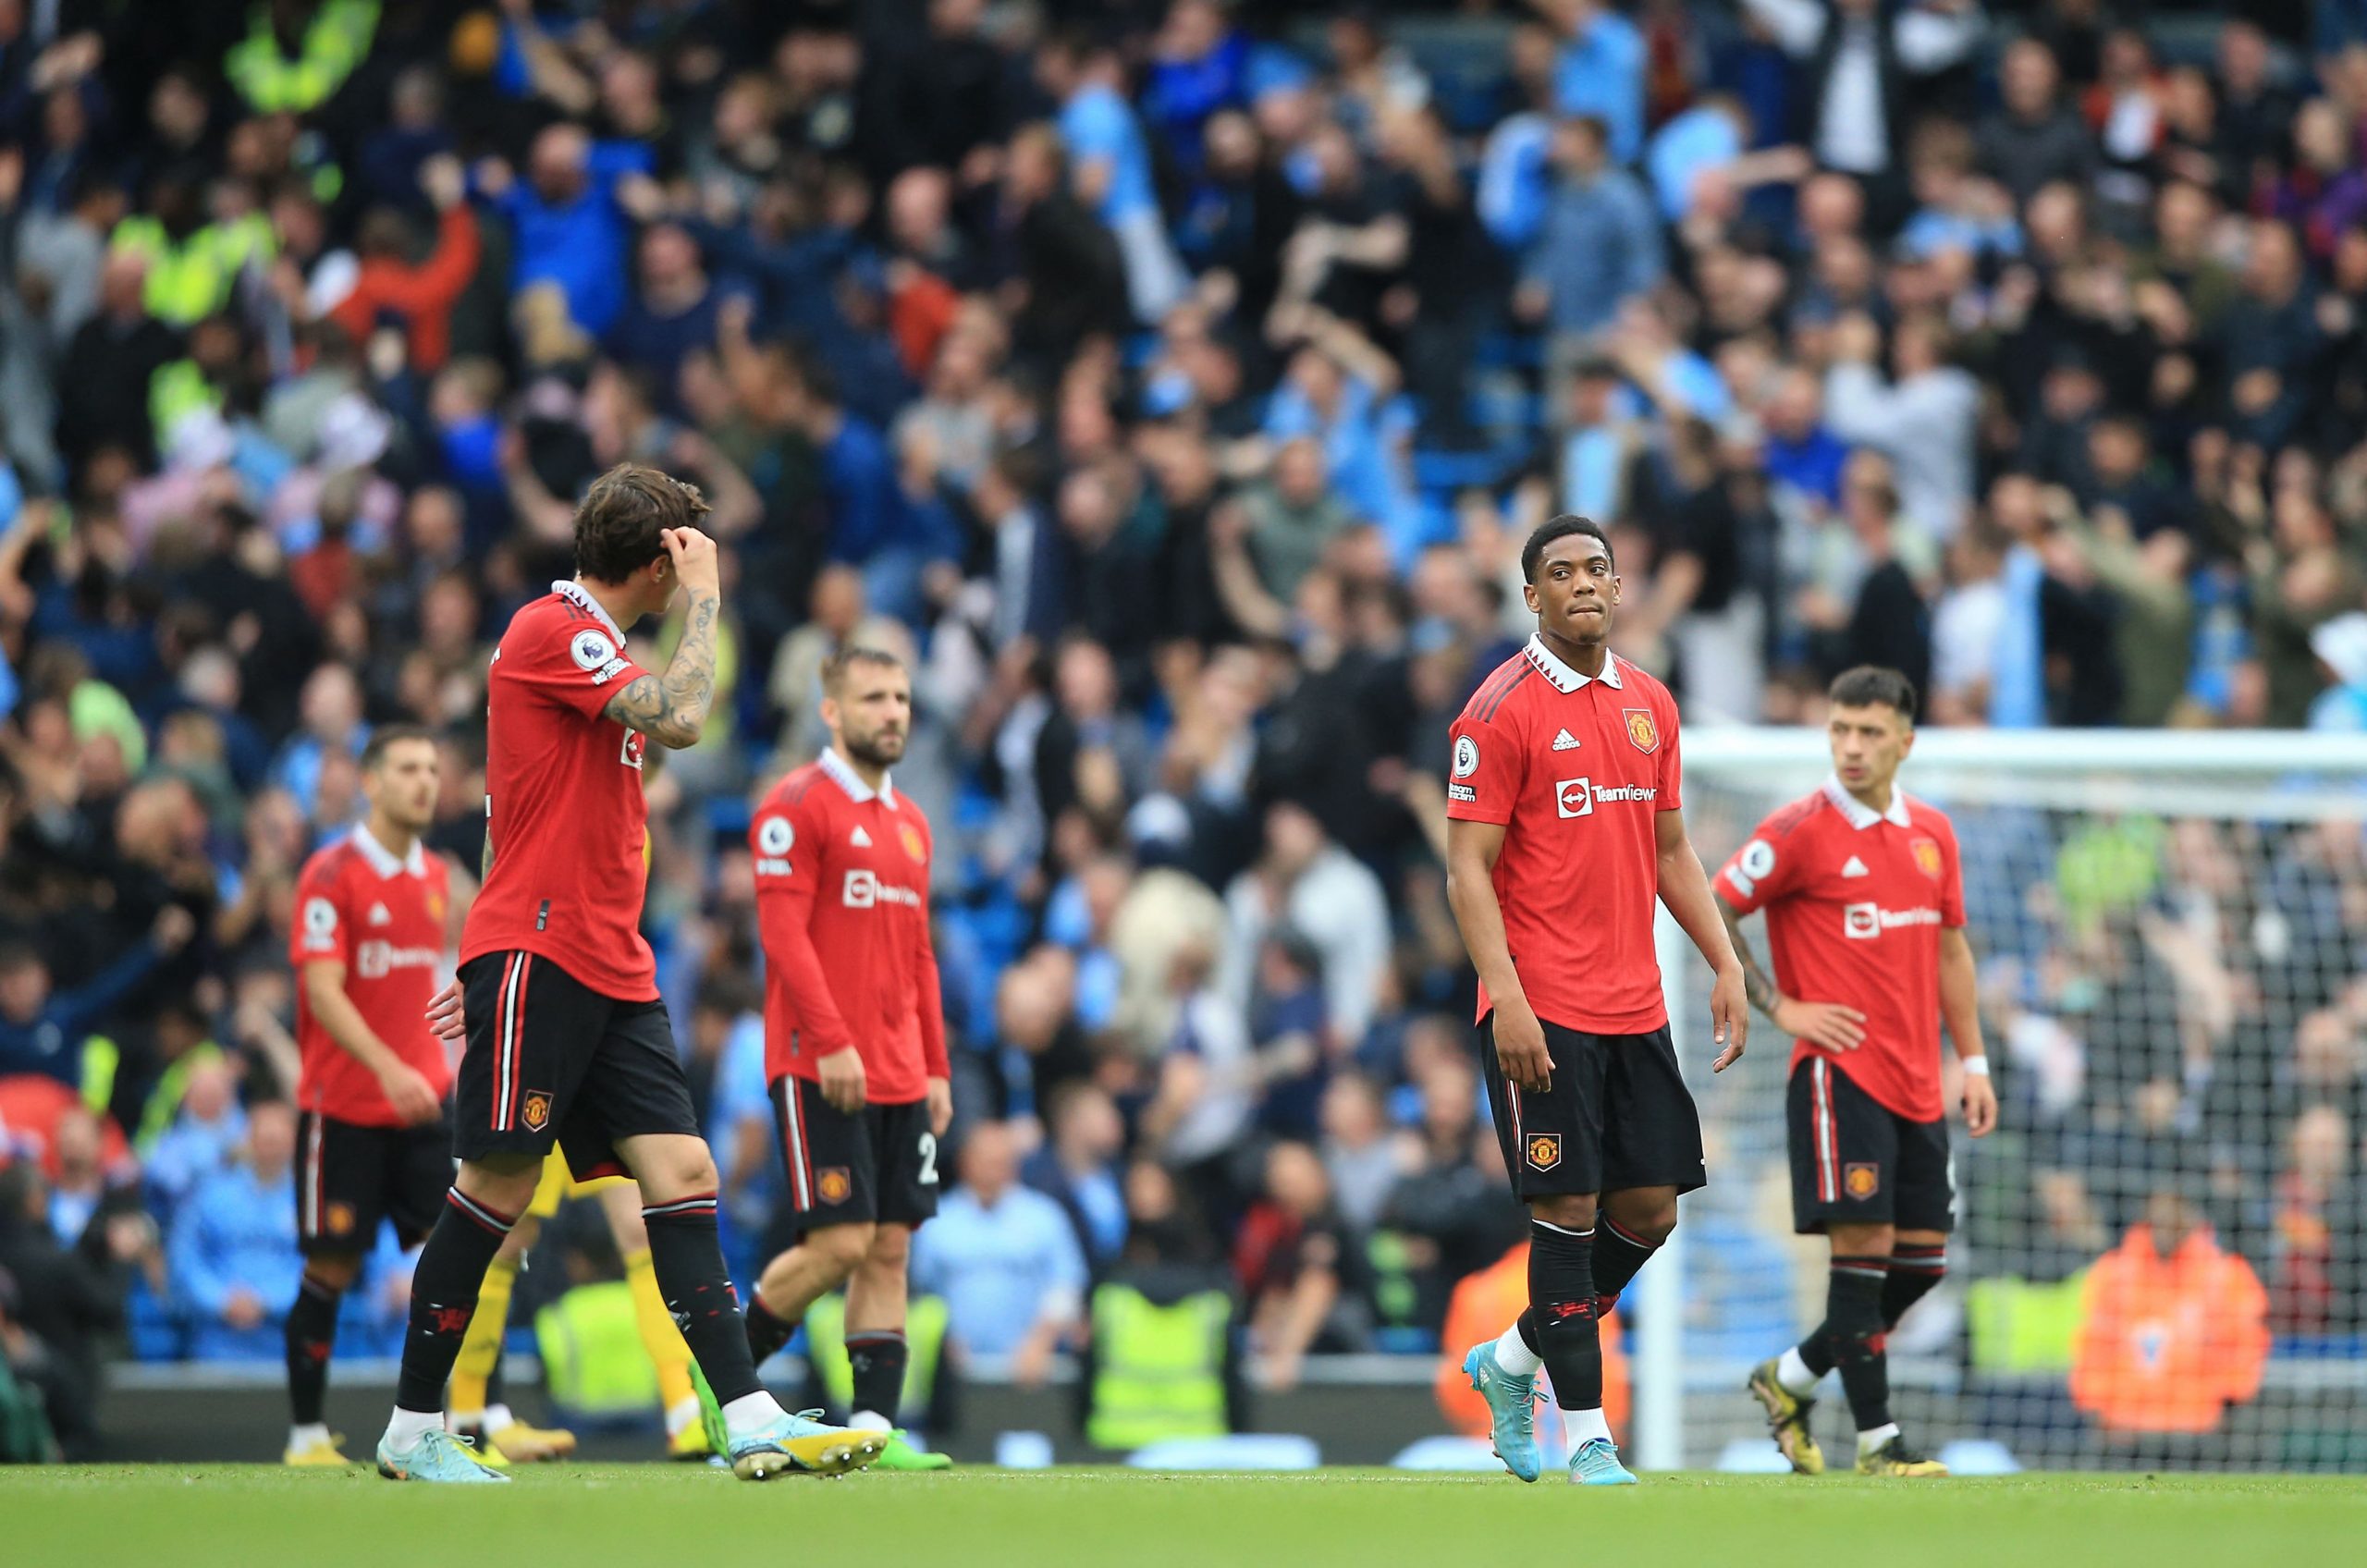 Manchester City thrashed United 6-3 in the derby. (Photo by LINDSEY PARNABY/AFP via Getty Images)